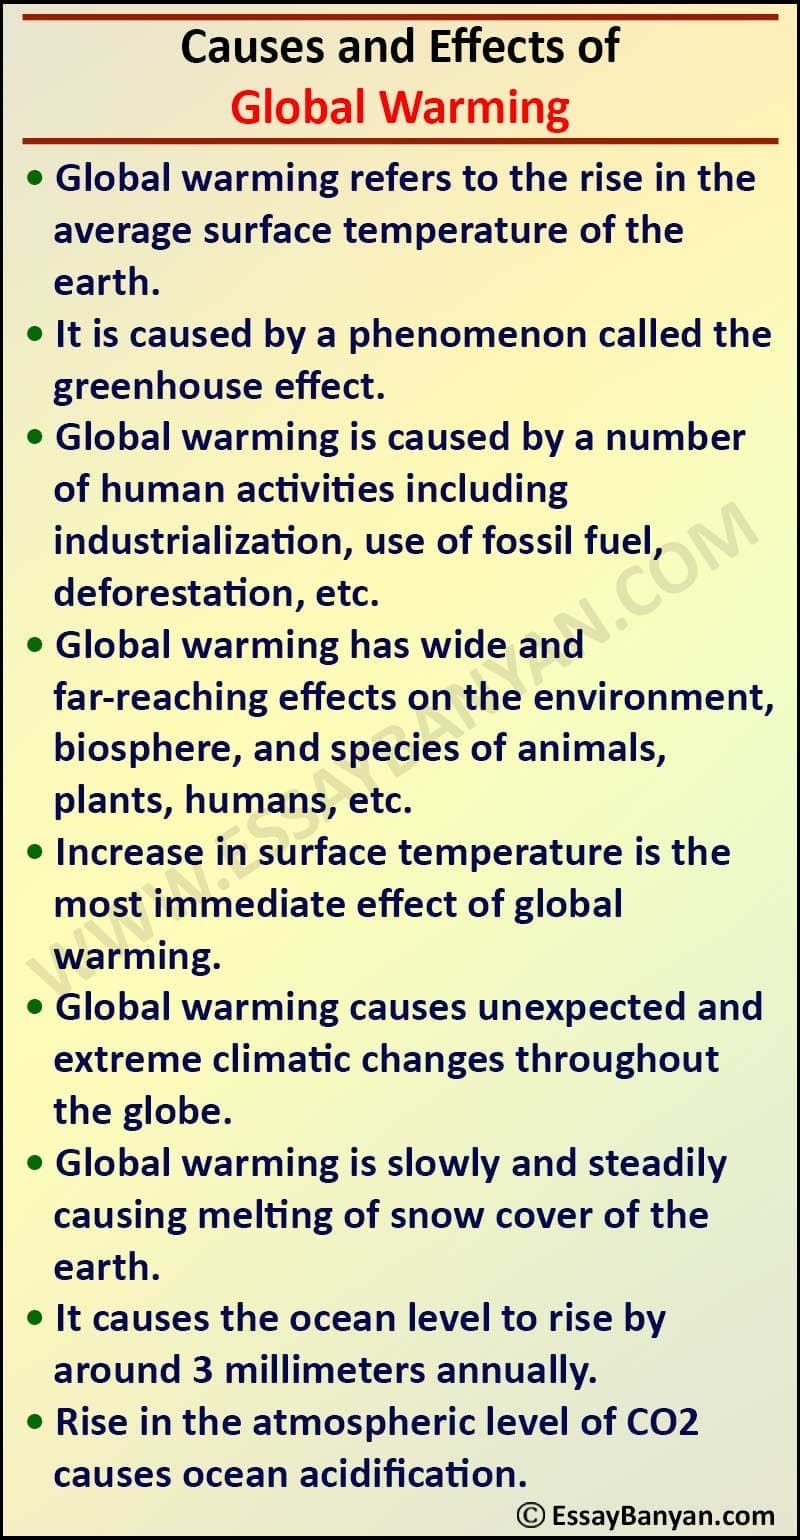 Causes and Effects of Global Warming Essay